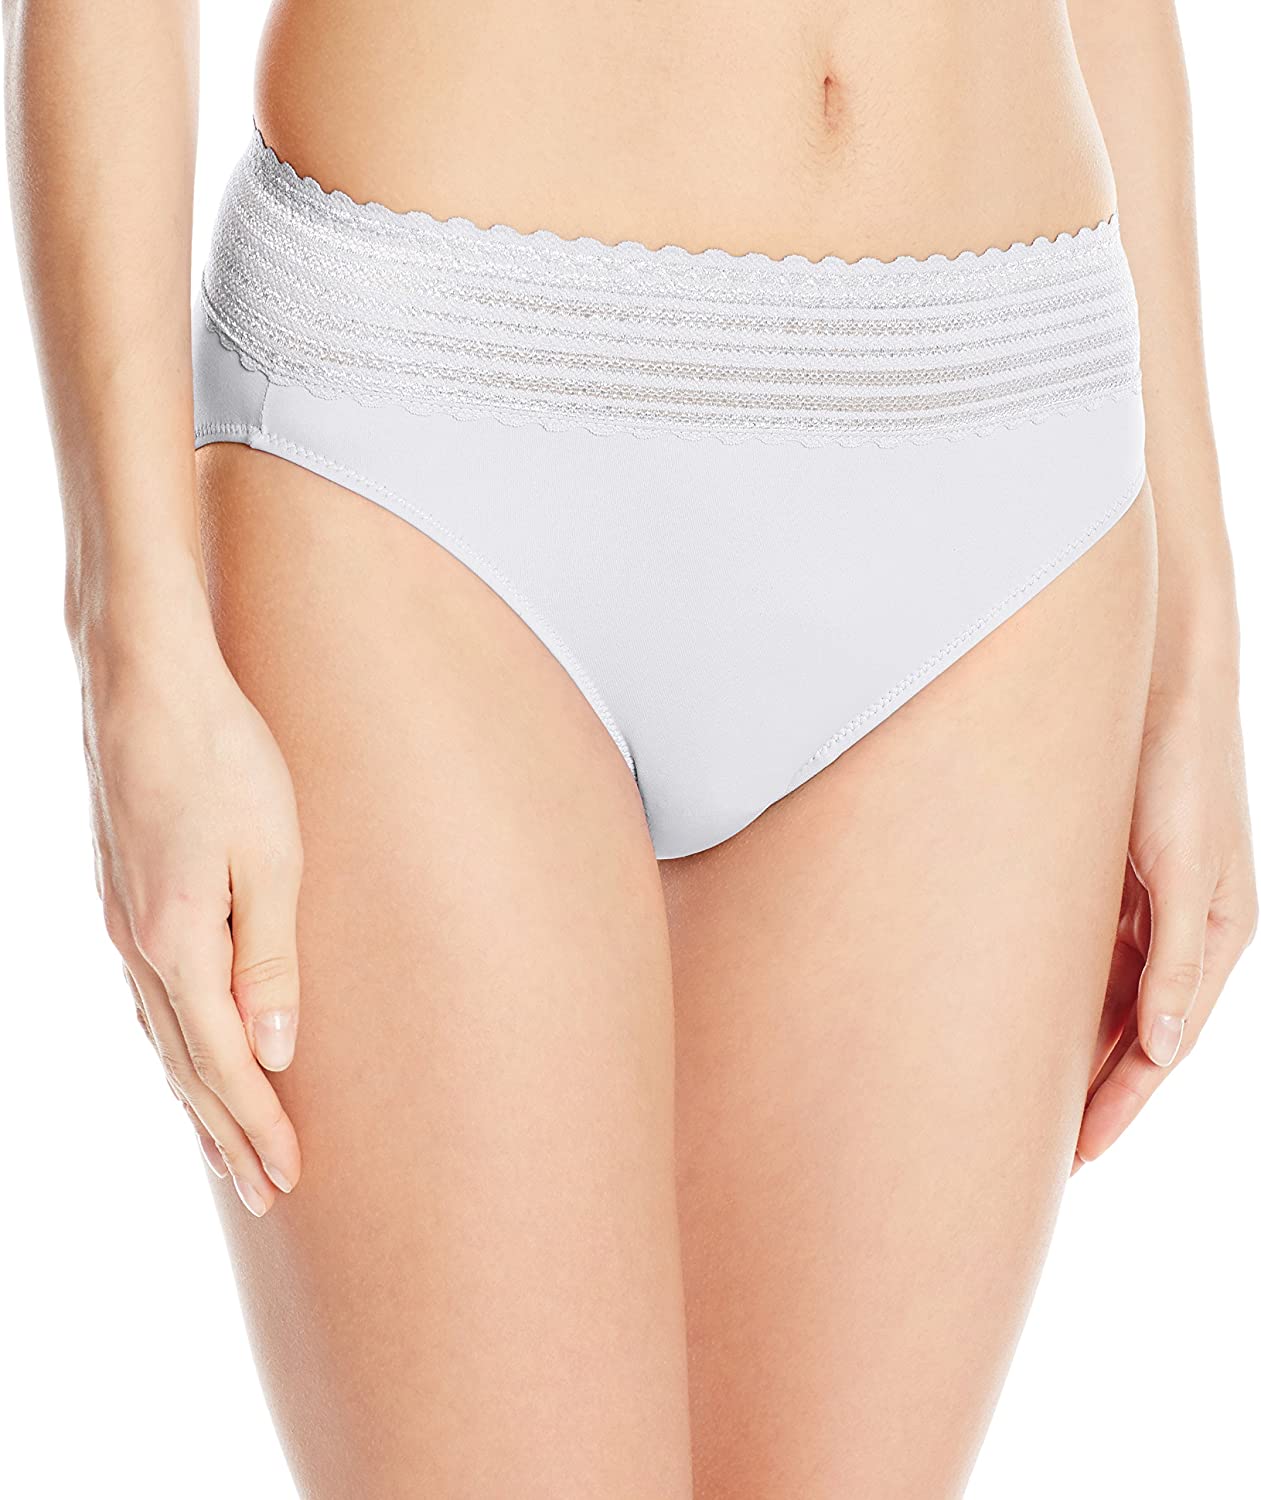 Price:$6.95 Warner's Women's No Pinching No Problems Lace Hi Cut Brief Panty at Amazon Women’s Clothing store